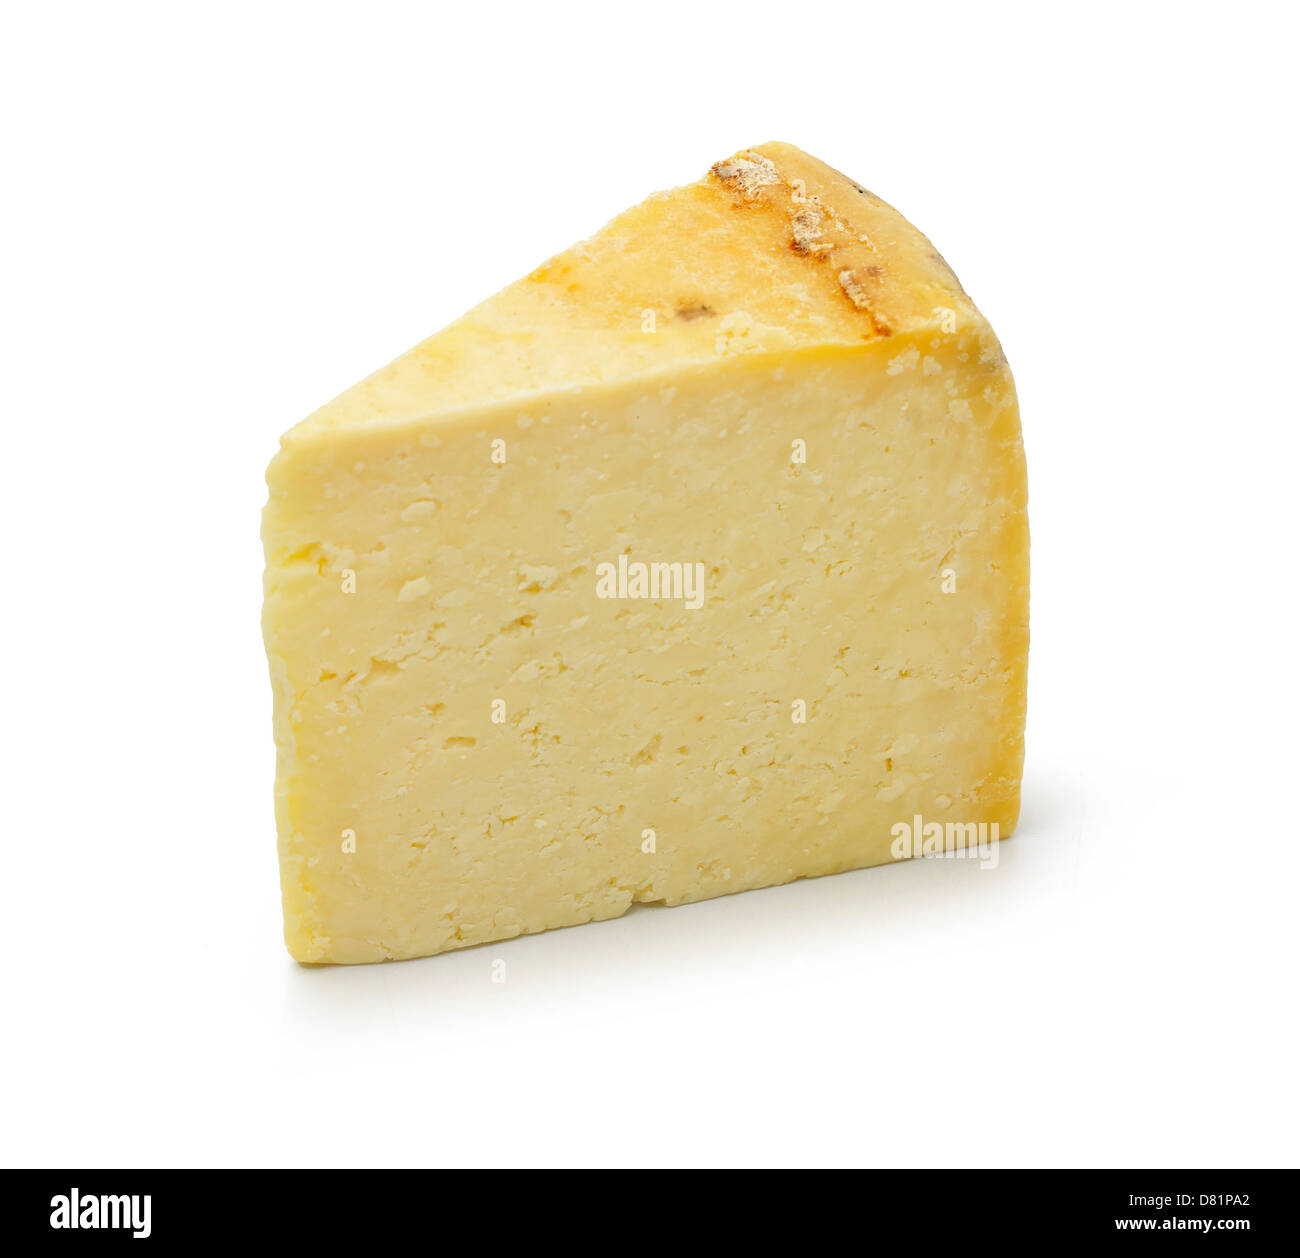 wedge of cheese cut out against a white background Stock Photo